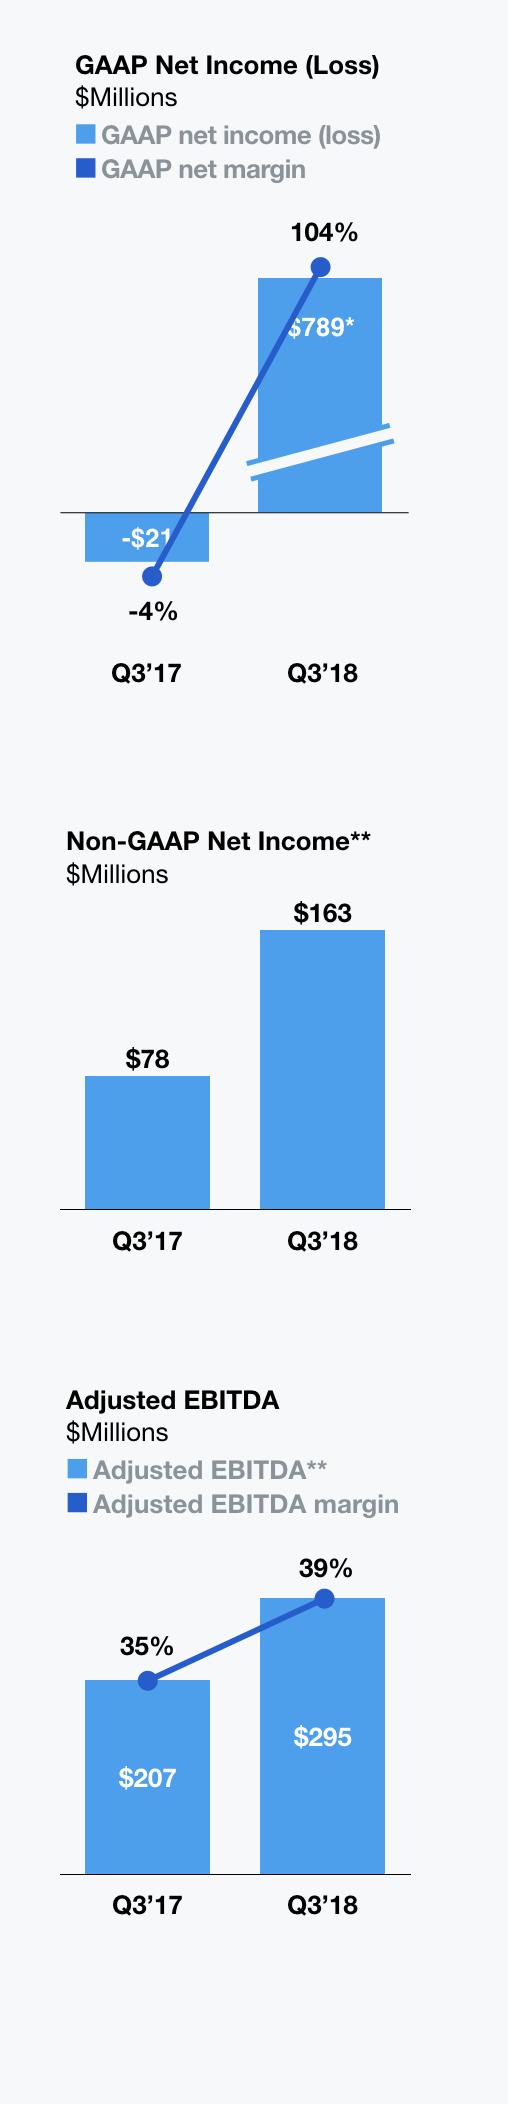 Profitability Q3 marked our fourth consecutive quarter of GAAP profitability with net income of $789 million, net margin of 104%, and diluted EPS of $1.02.